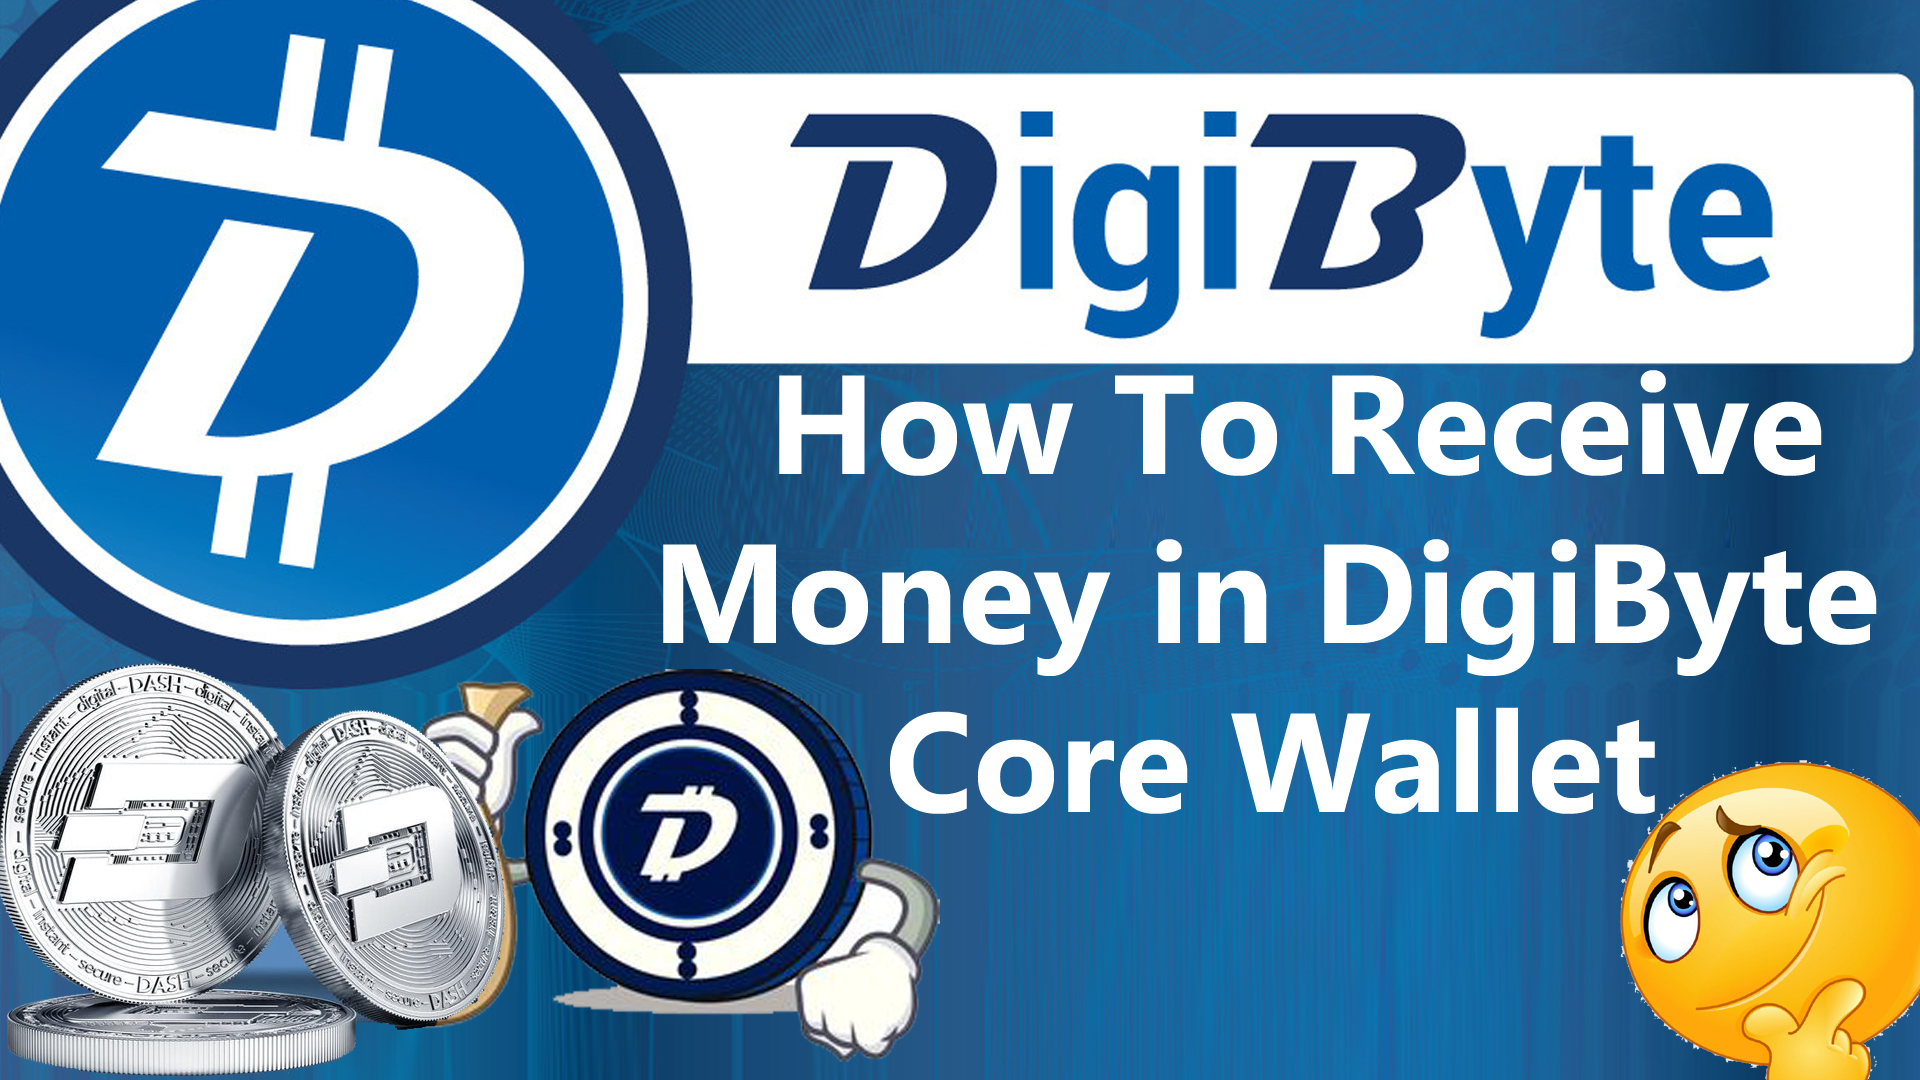 How To Receive Money in DigiByte Core Wallet by Crypto Wallets Info.jpg